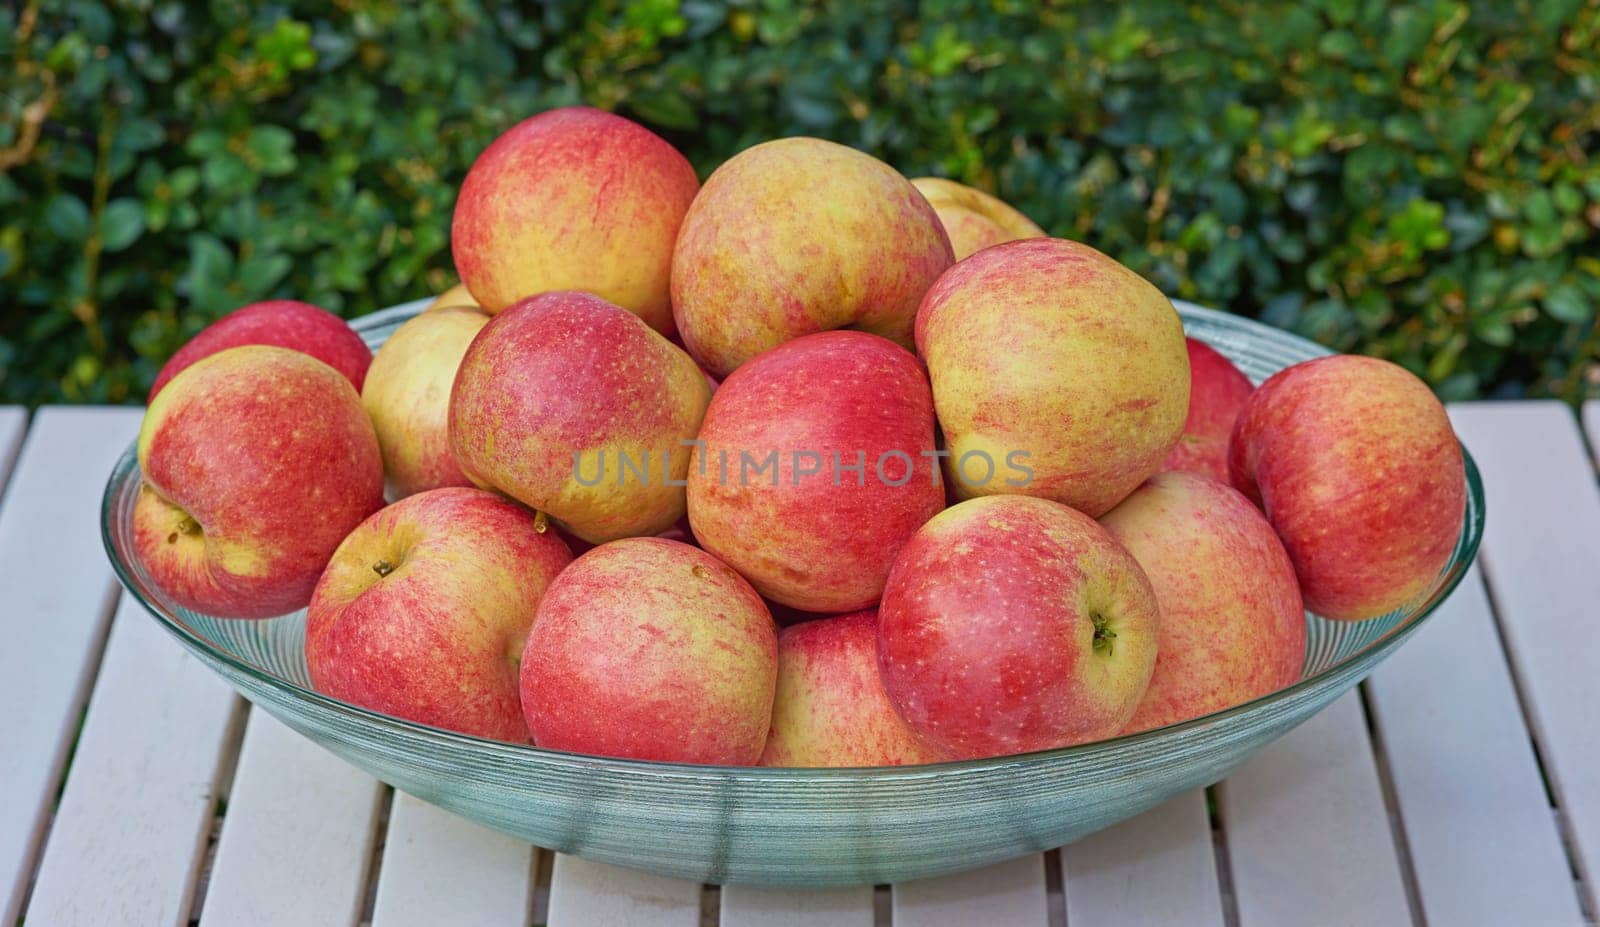 Red apples, bowl and outdoor with nutrition for wellness, healthy snack and treat with produce and harvest. Organic, fruit and growth with nature and diet plan with fiber and protein with vitamins.